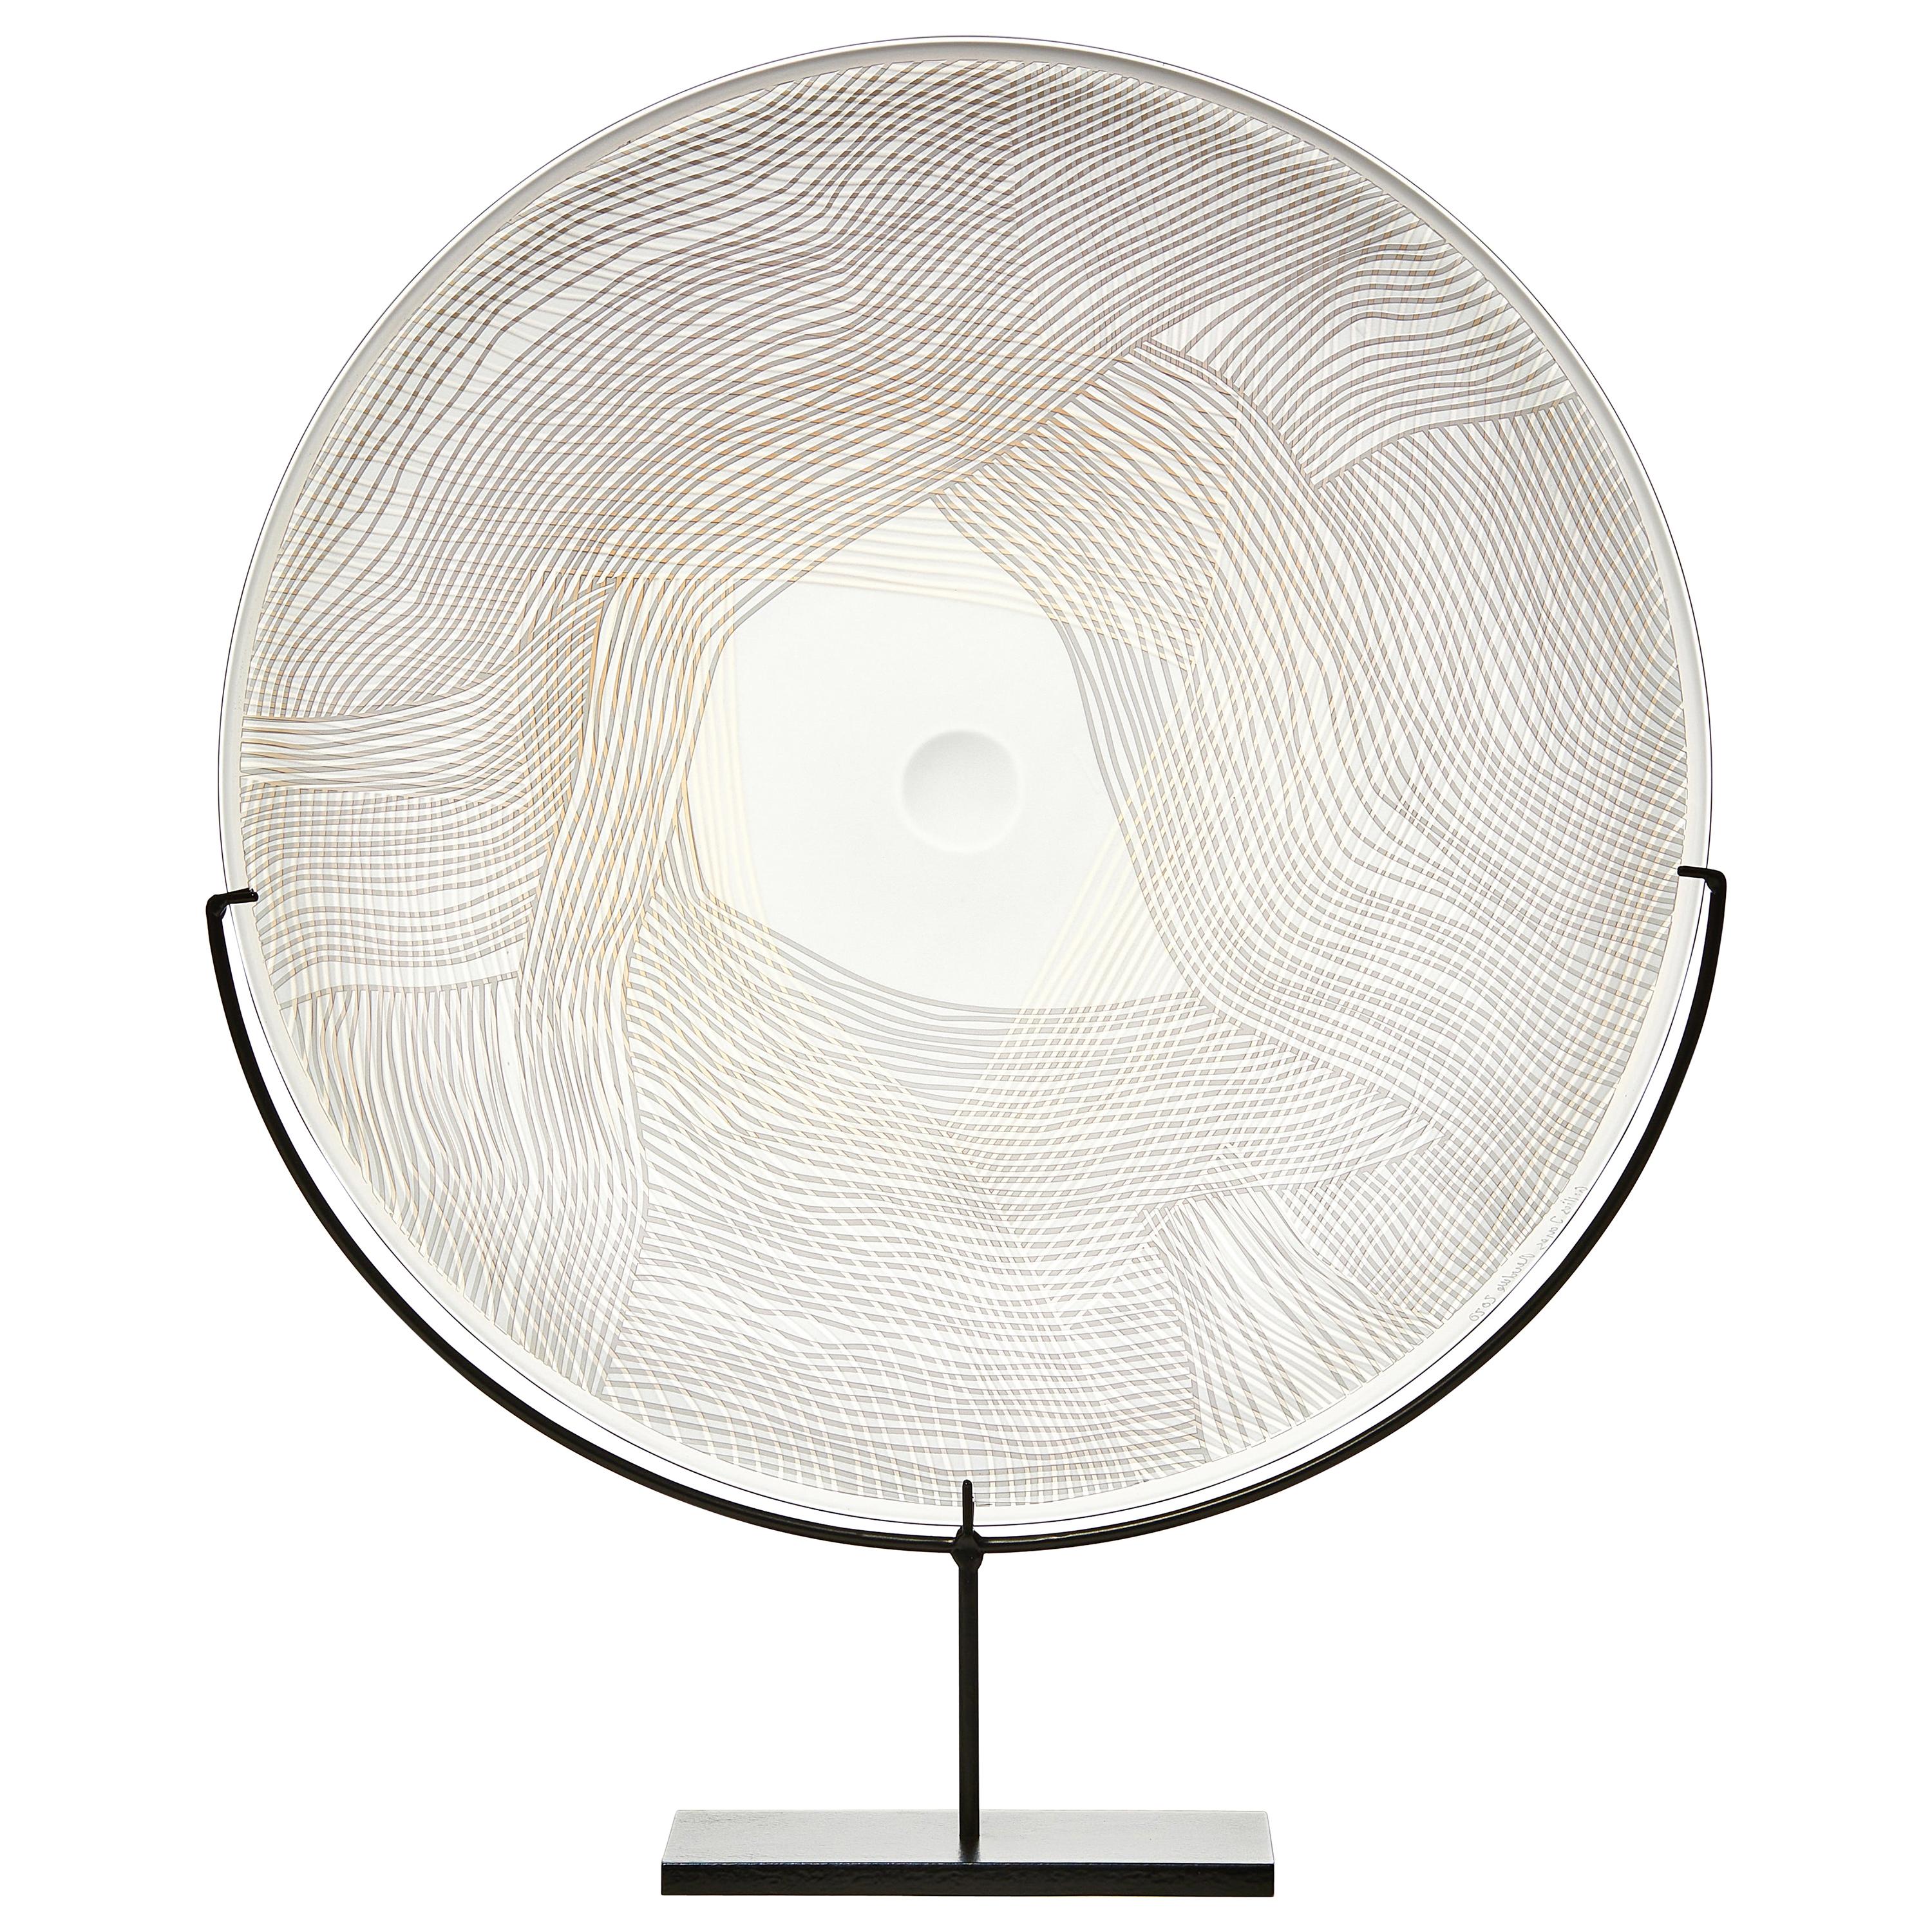 Layer on Layer, a Unique Gold, Grey and Clear Glass Sculptural Plate, Kate Jones